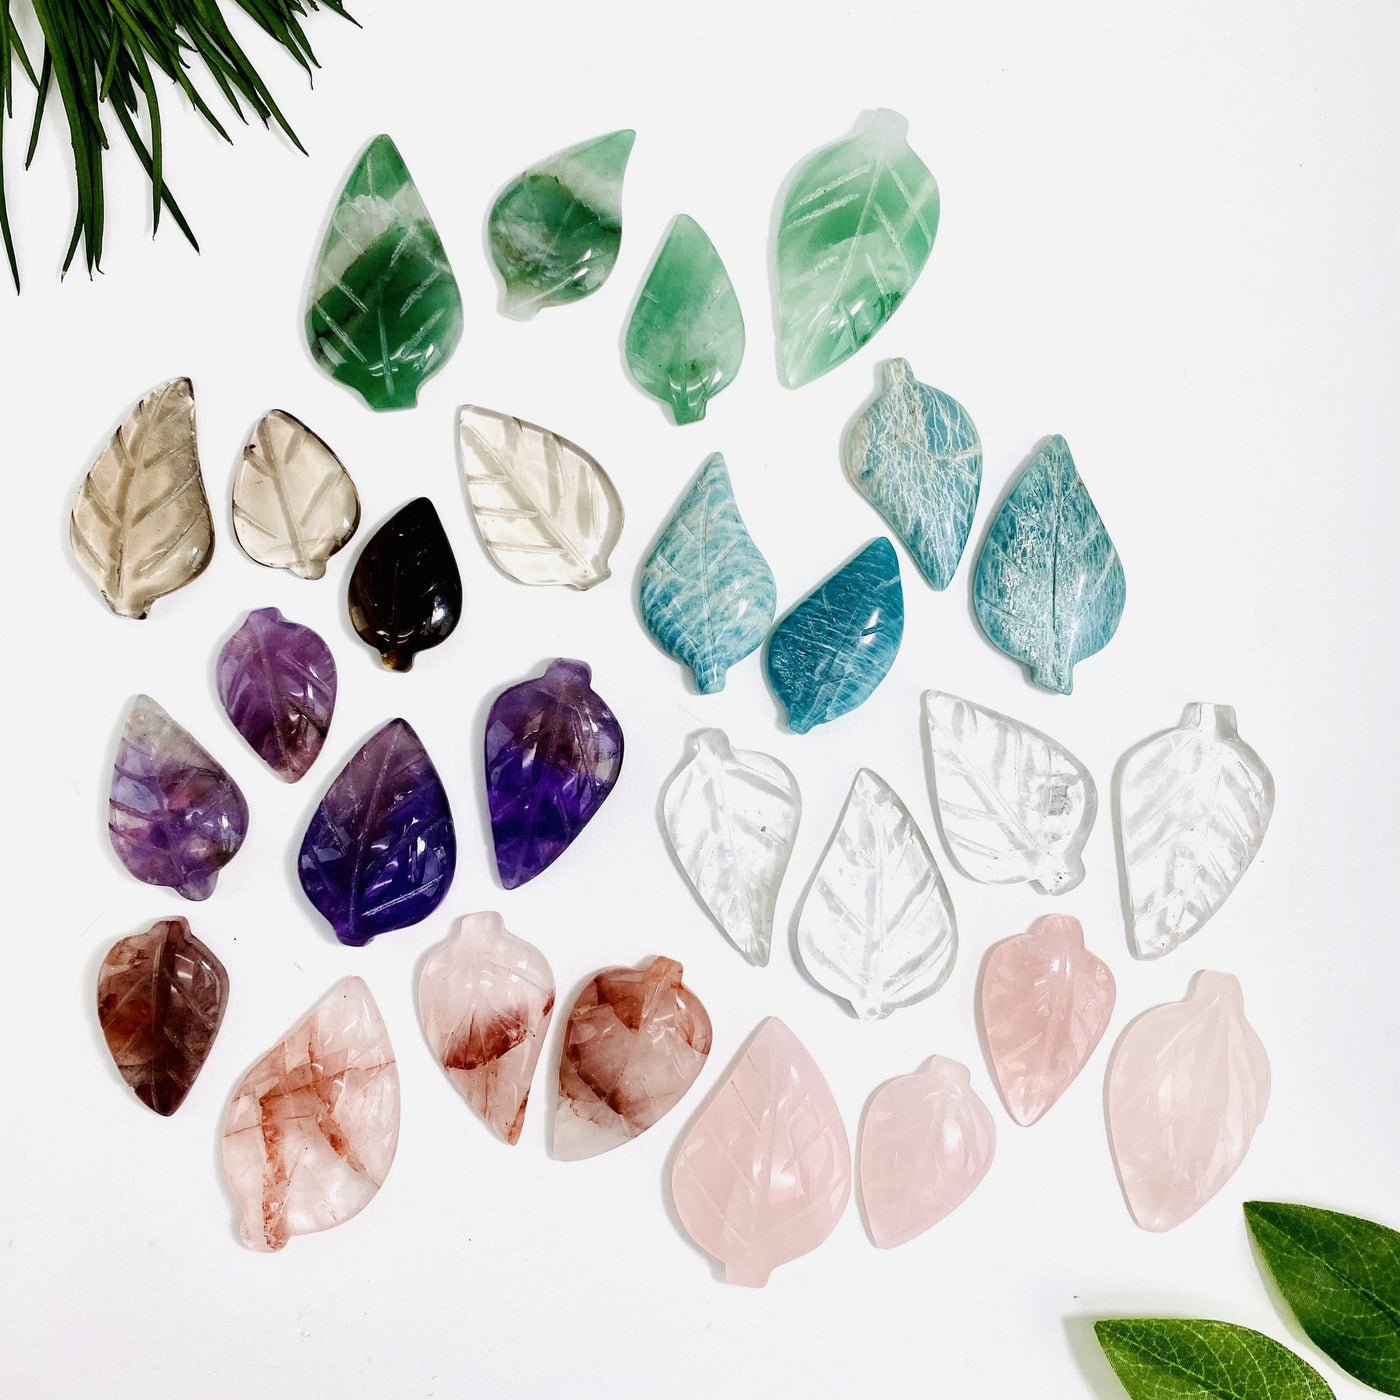 A bunch of Gemstone Leaves in all the stones available, showing variation in markings and shades